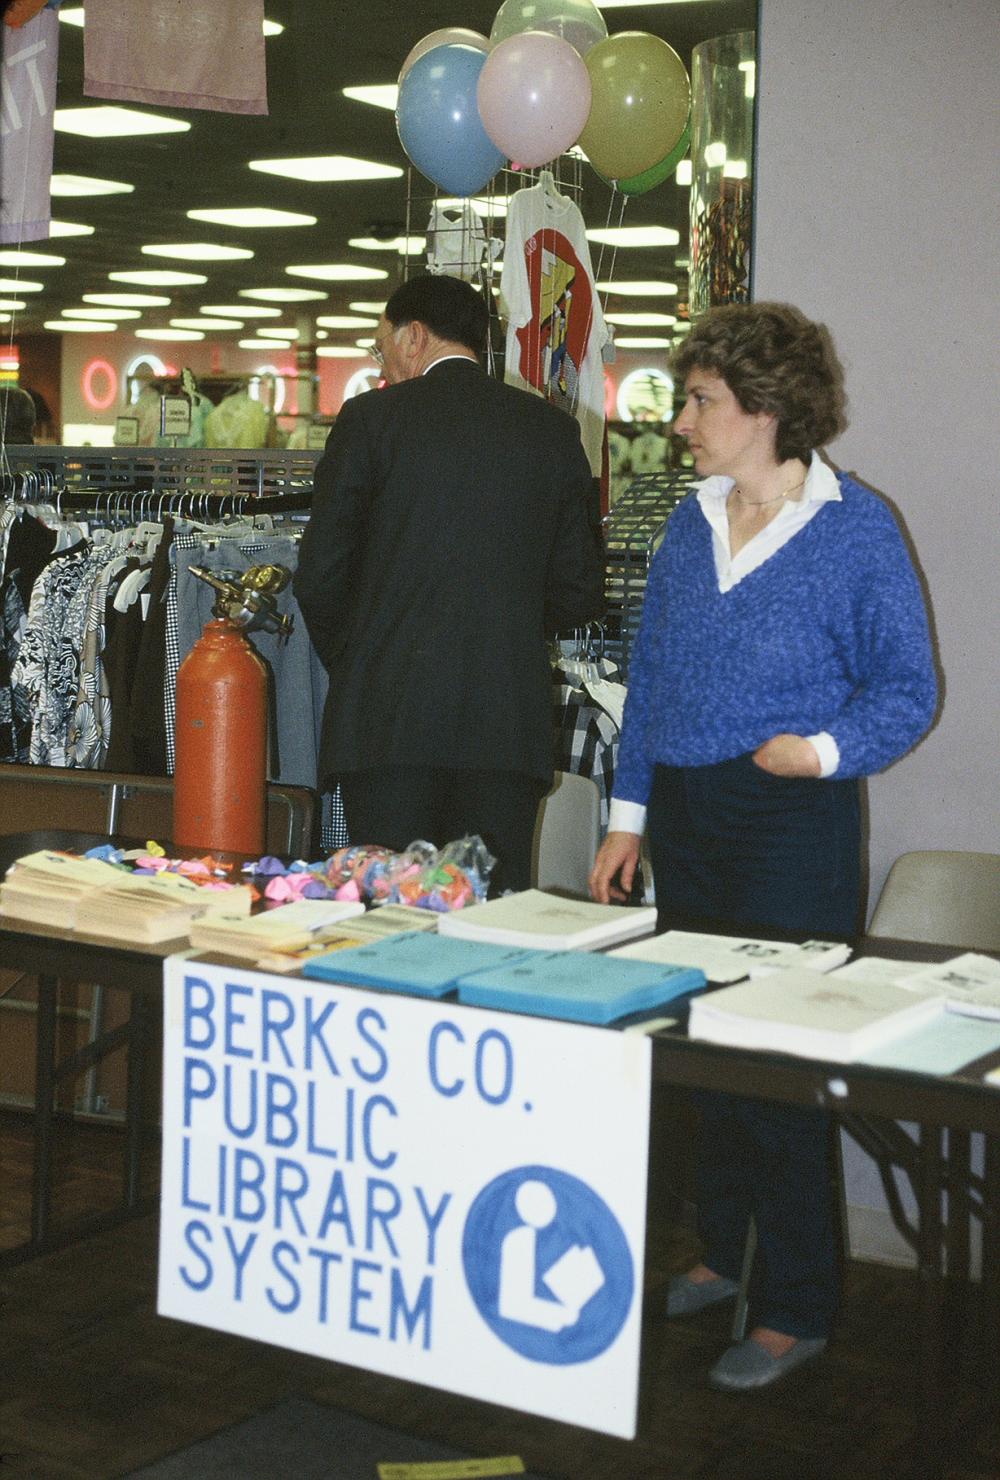 Old photo of Berks County Public Libraries staff member at booth